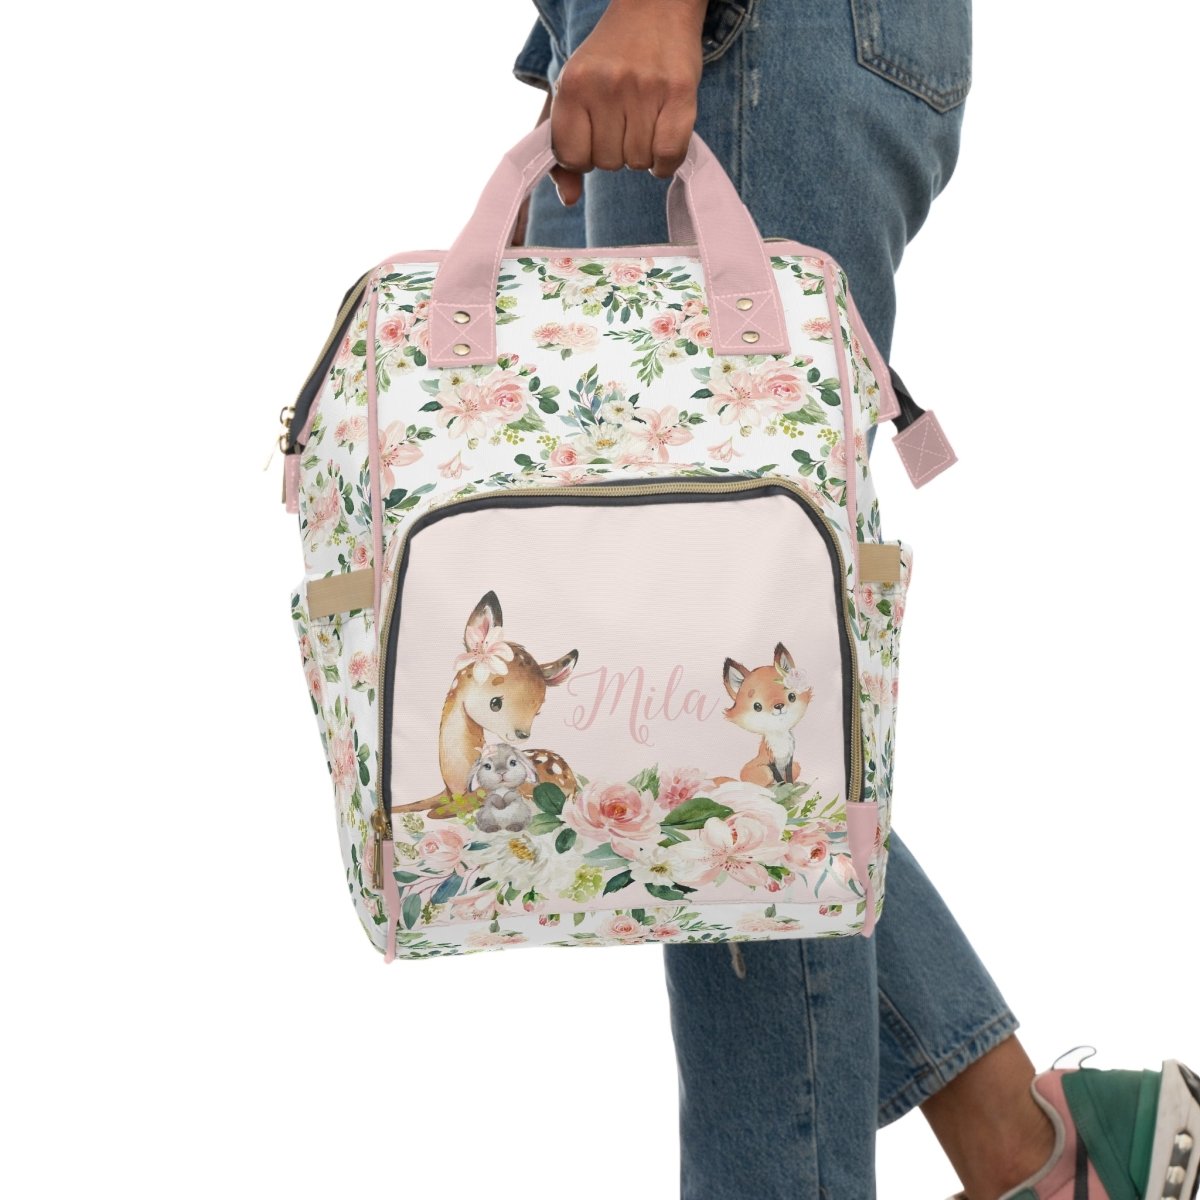 Woodland Meadows Personalized Backpack Diaper Bag - gender_girl, text, Theme_Floral